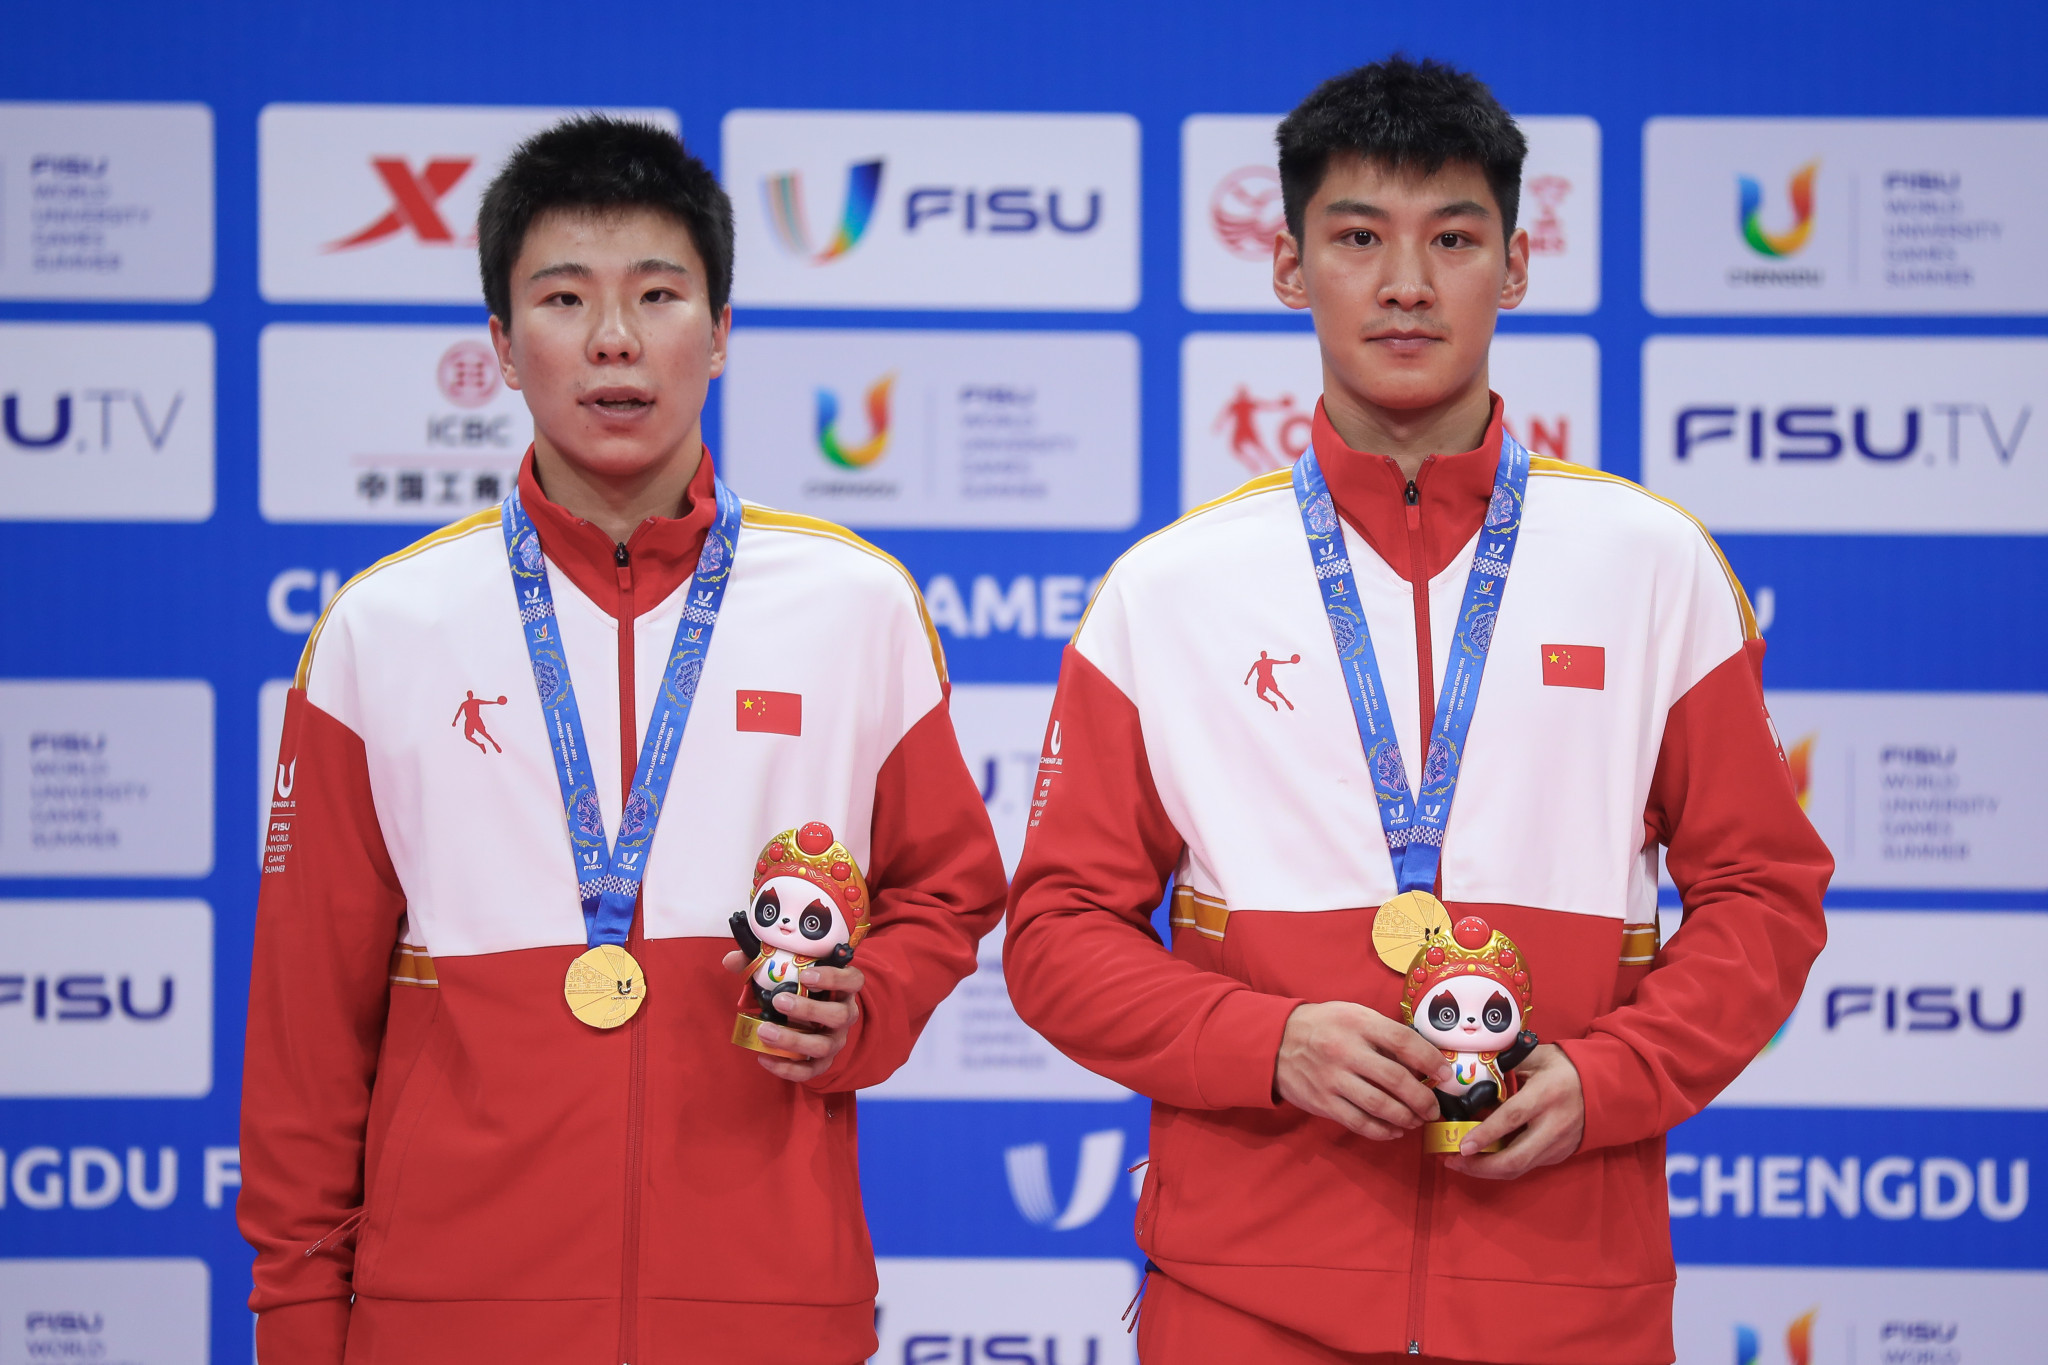 Hosts claim men's doubles table tennis gold at Chengdu 2021